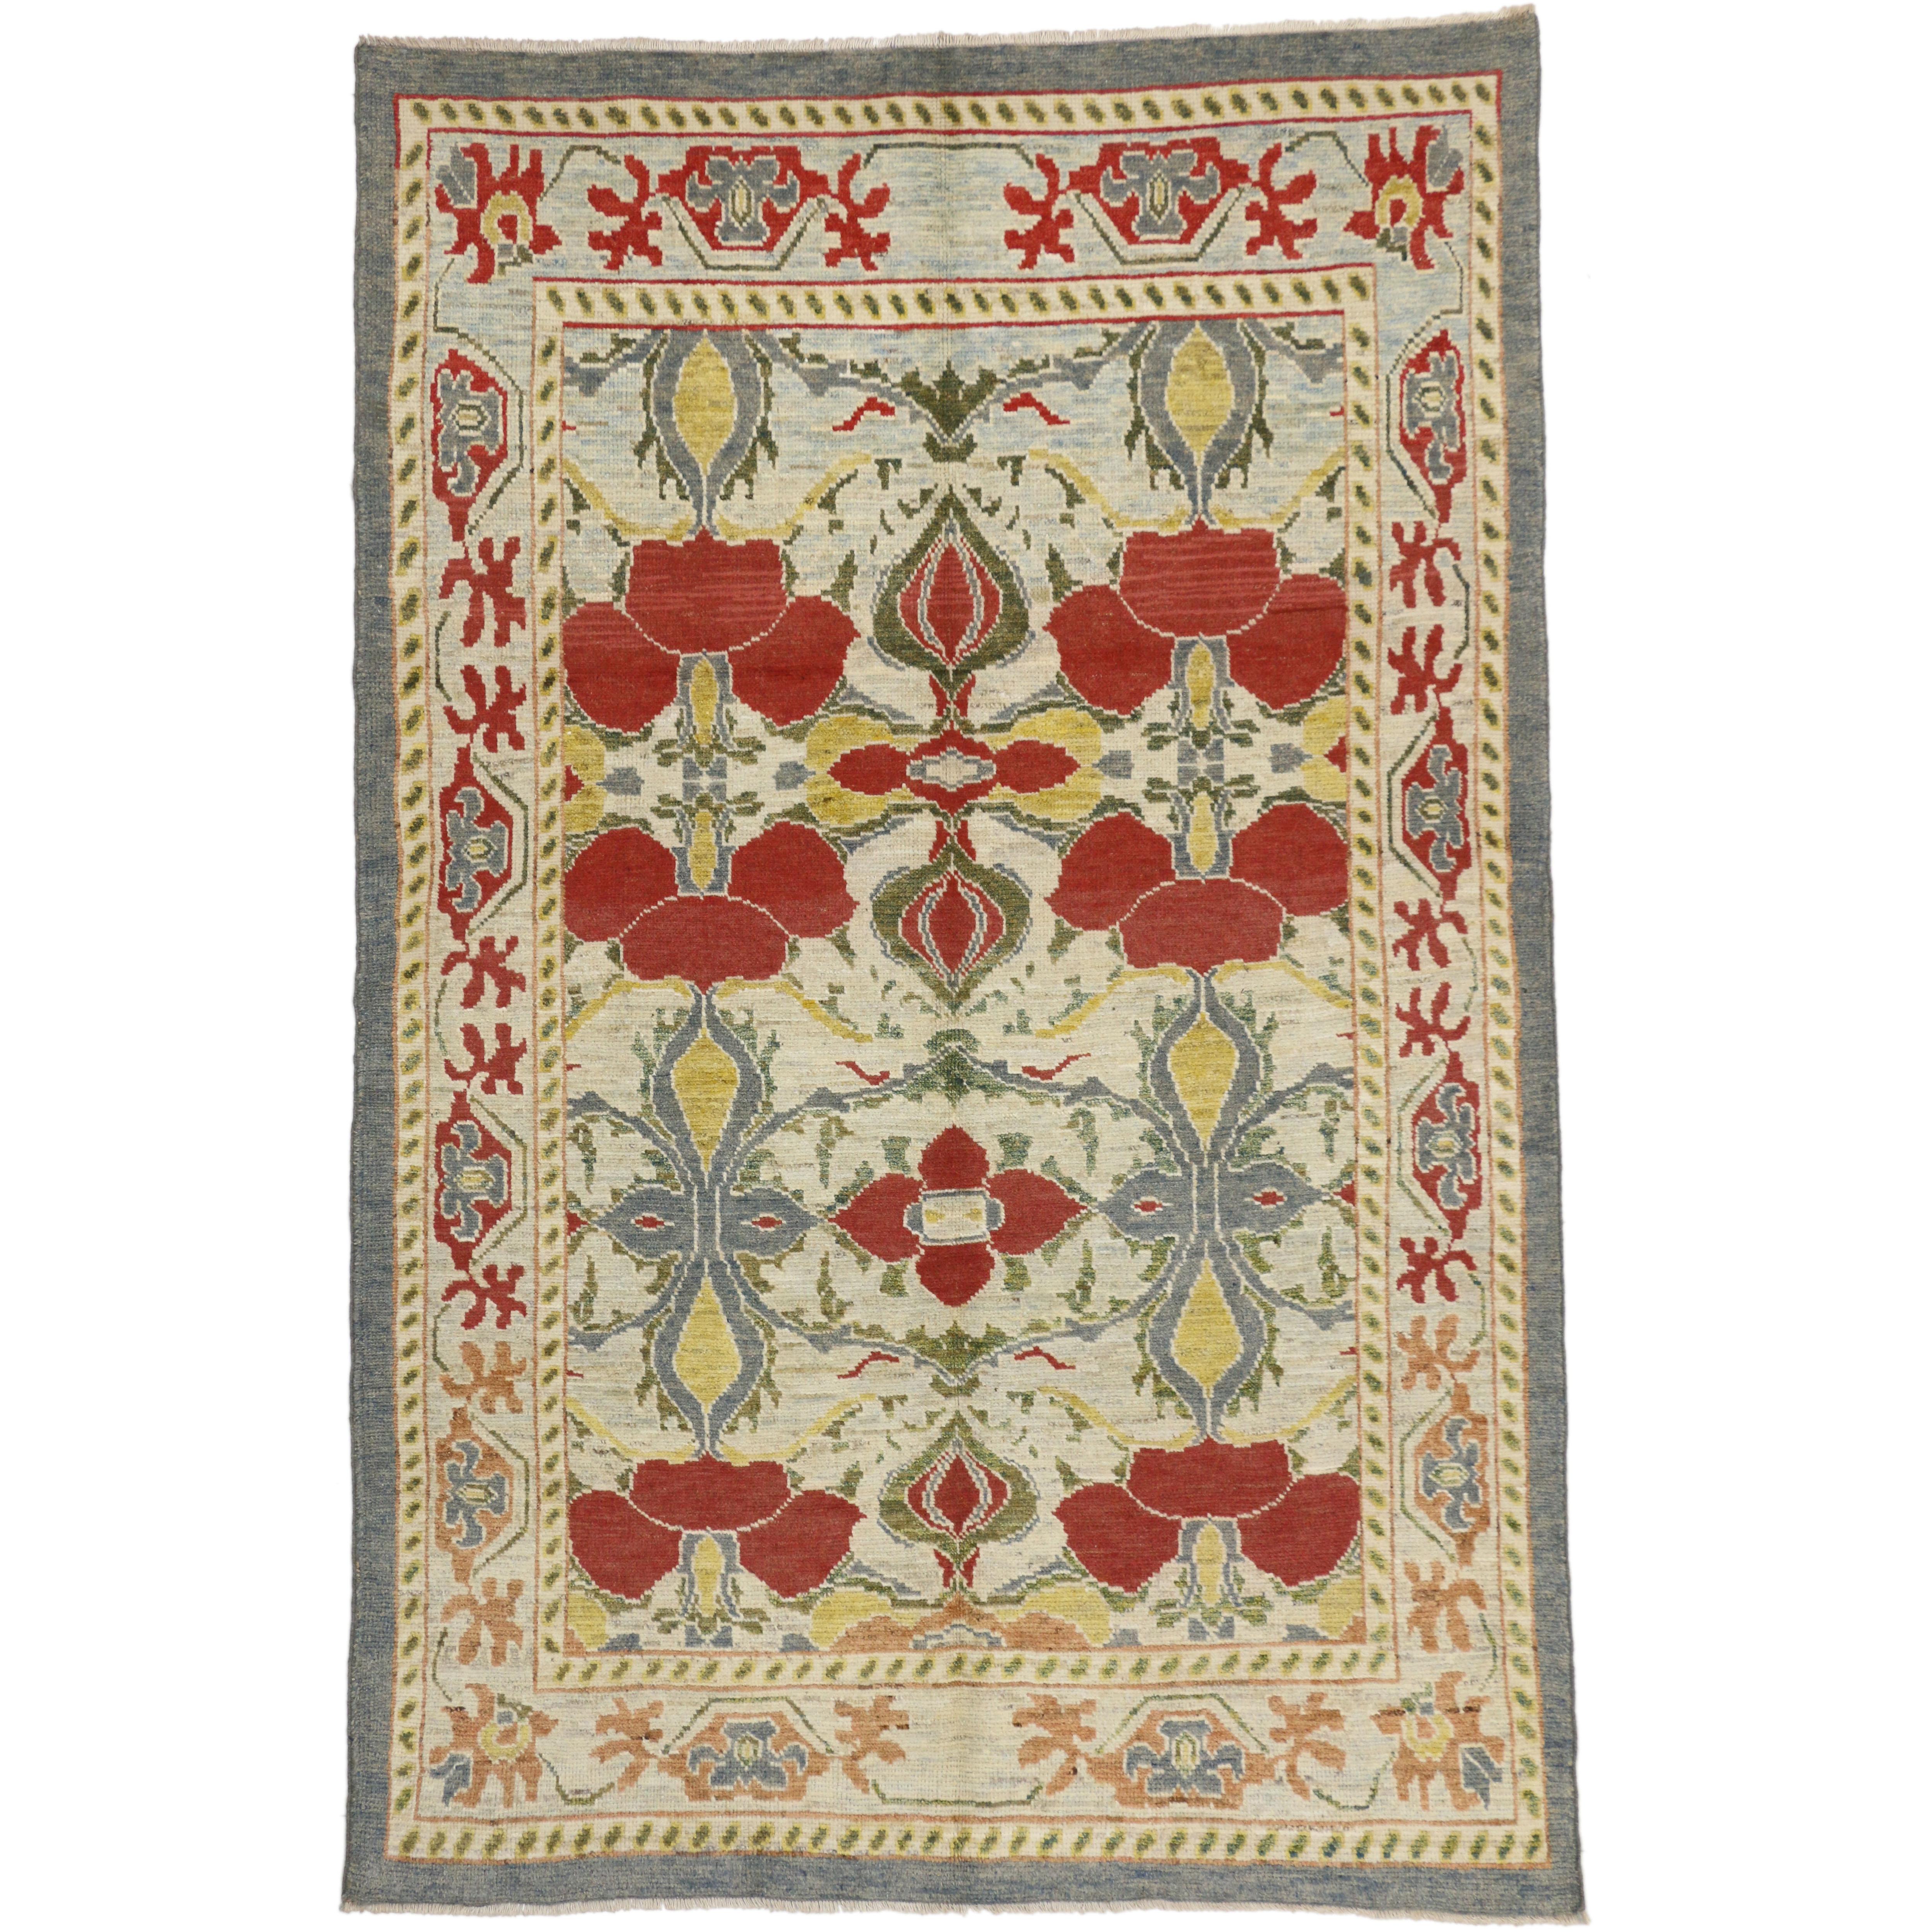 New Turkish Oushak Rug with Arts & Crafts Style Inspired by William Morris 